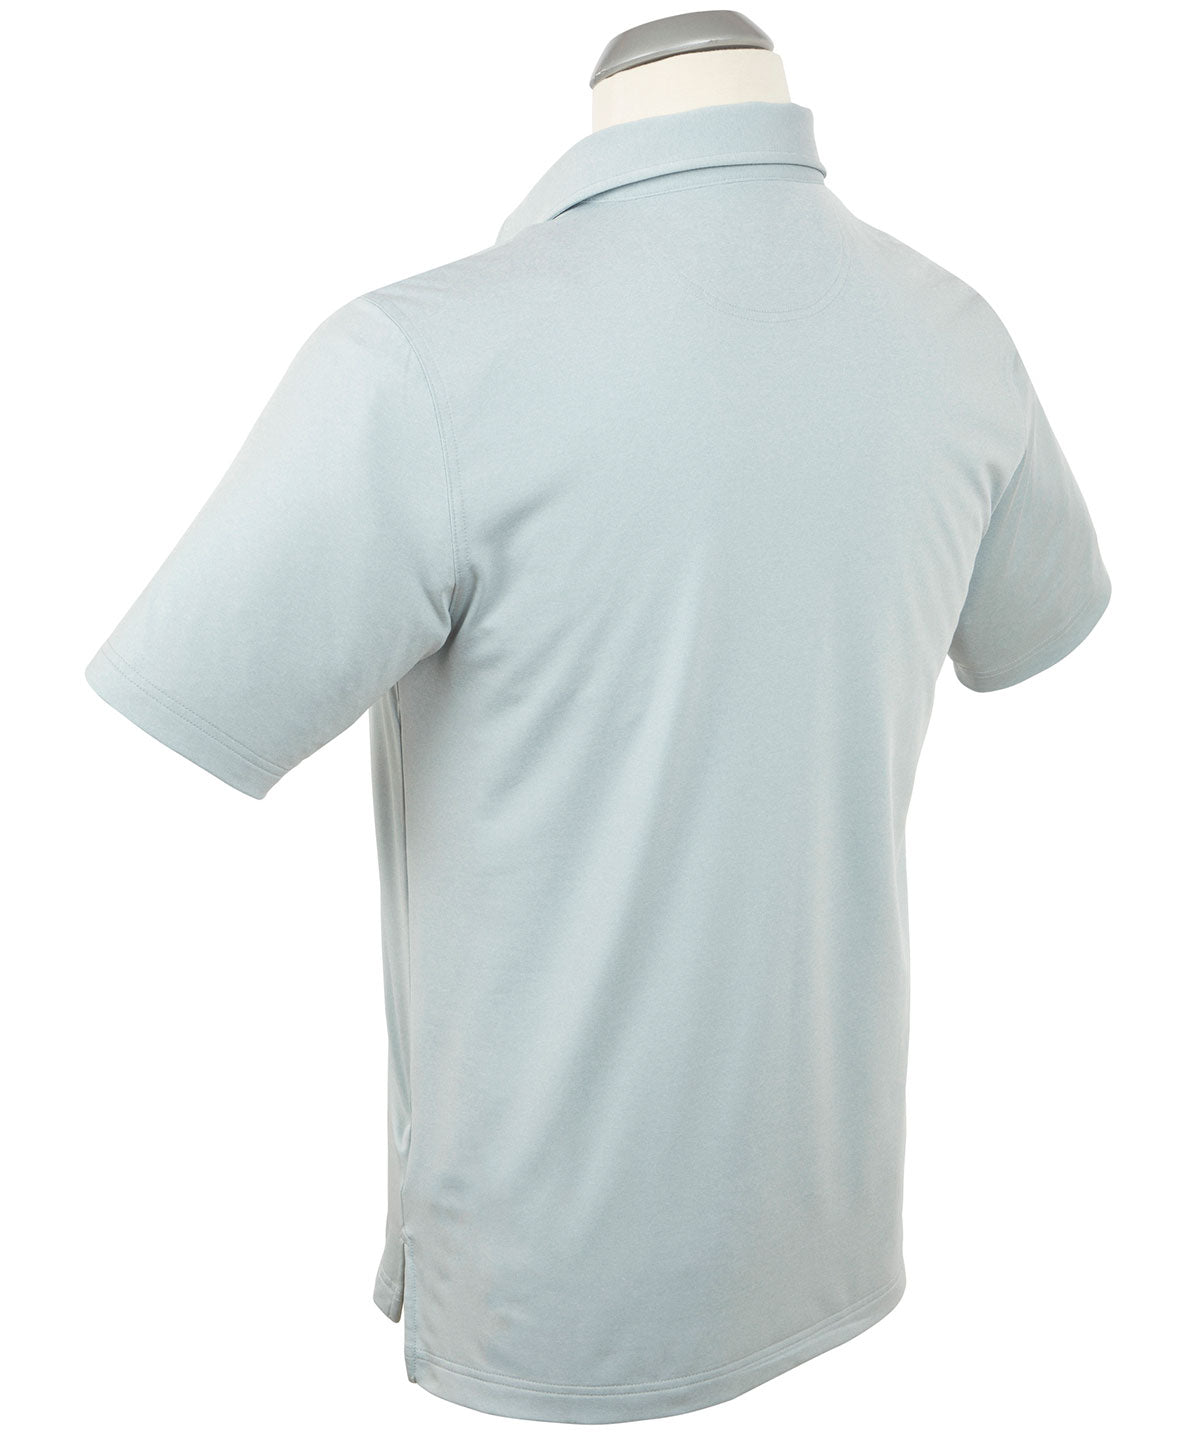 Performance Jersey Chest Stripe Polo